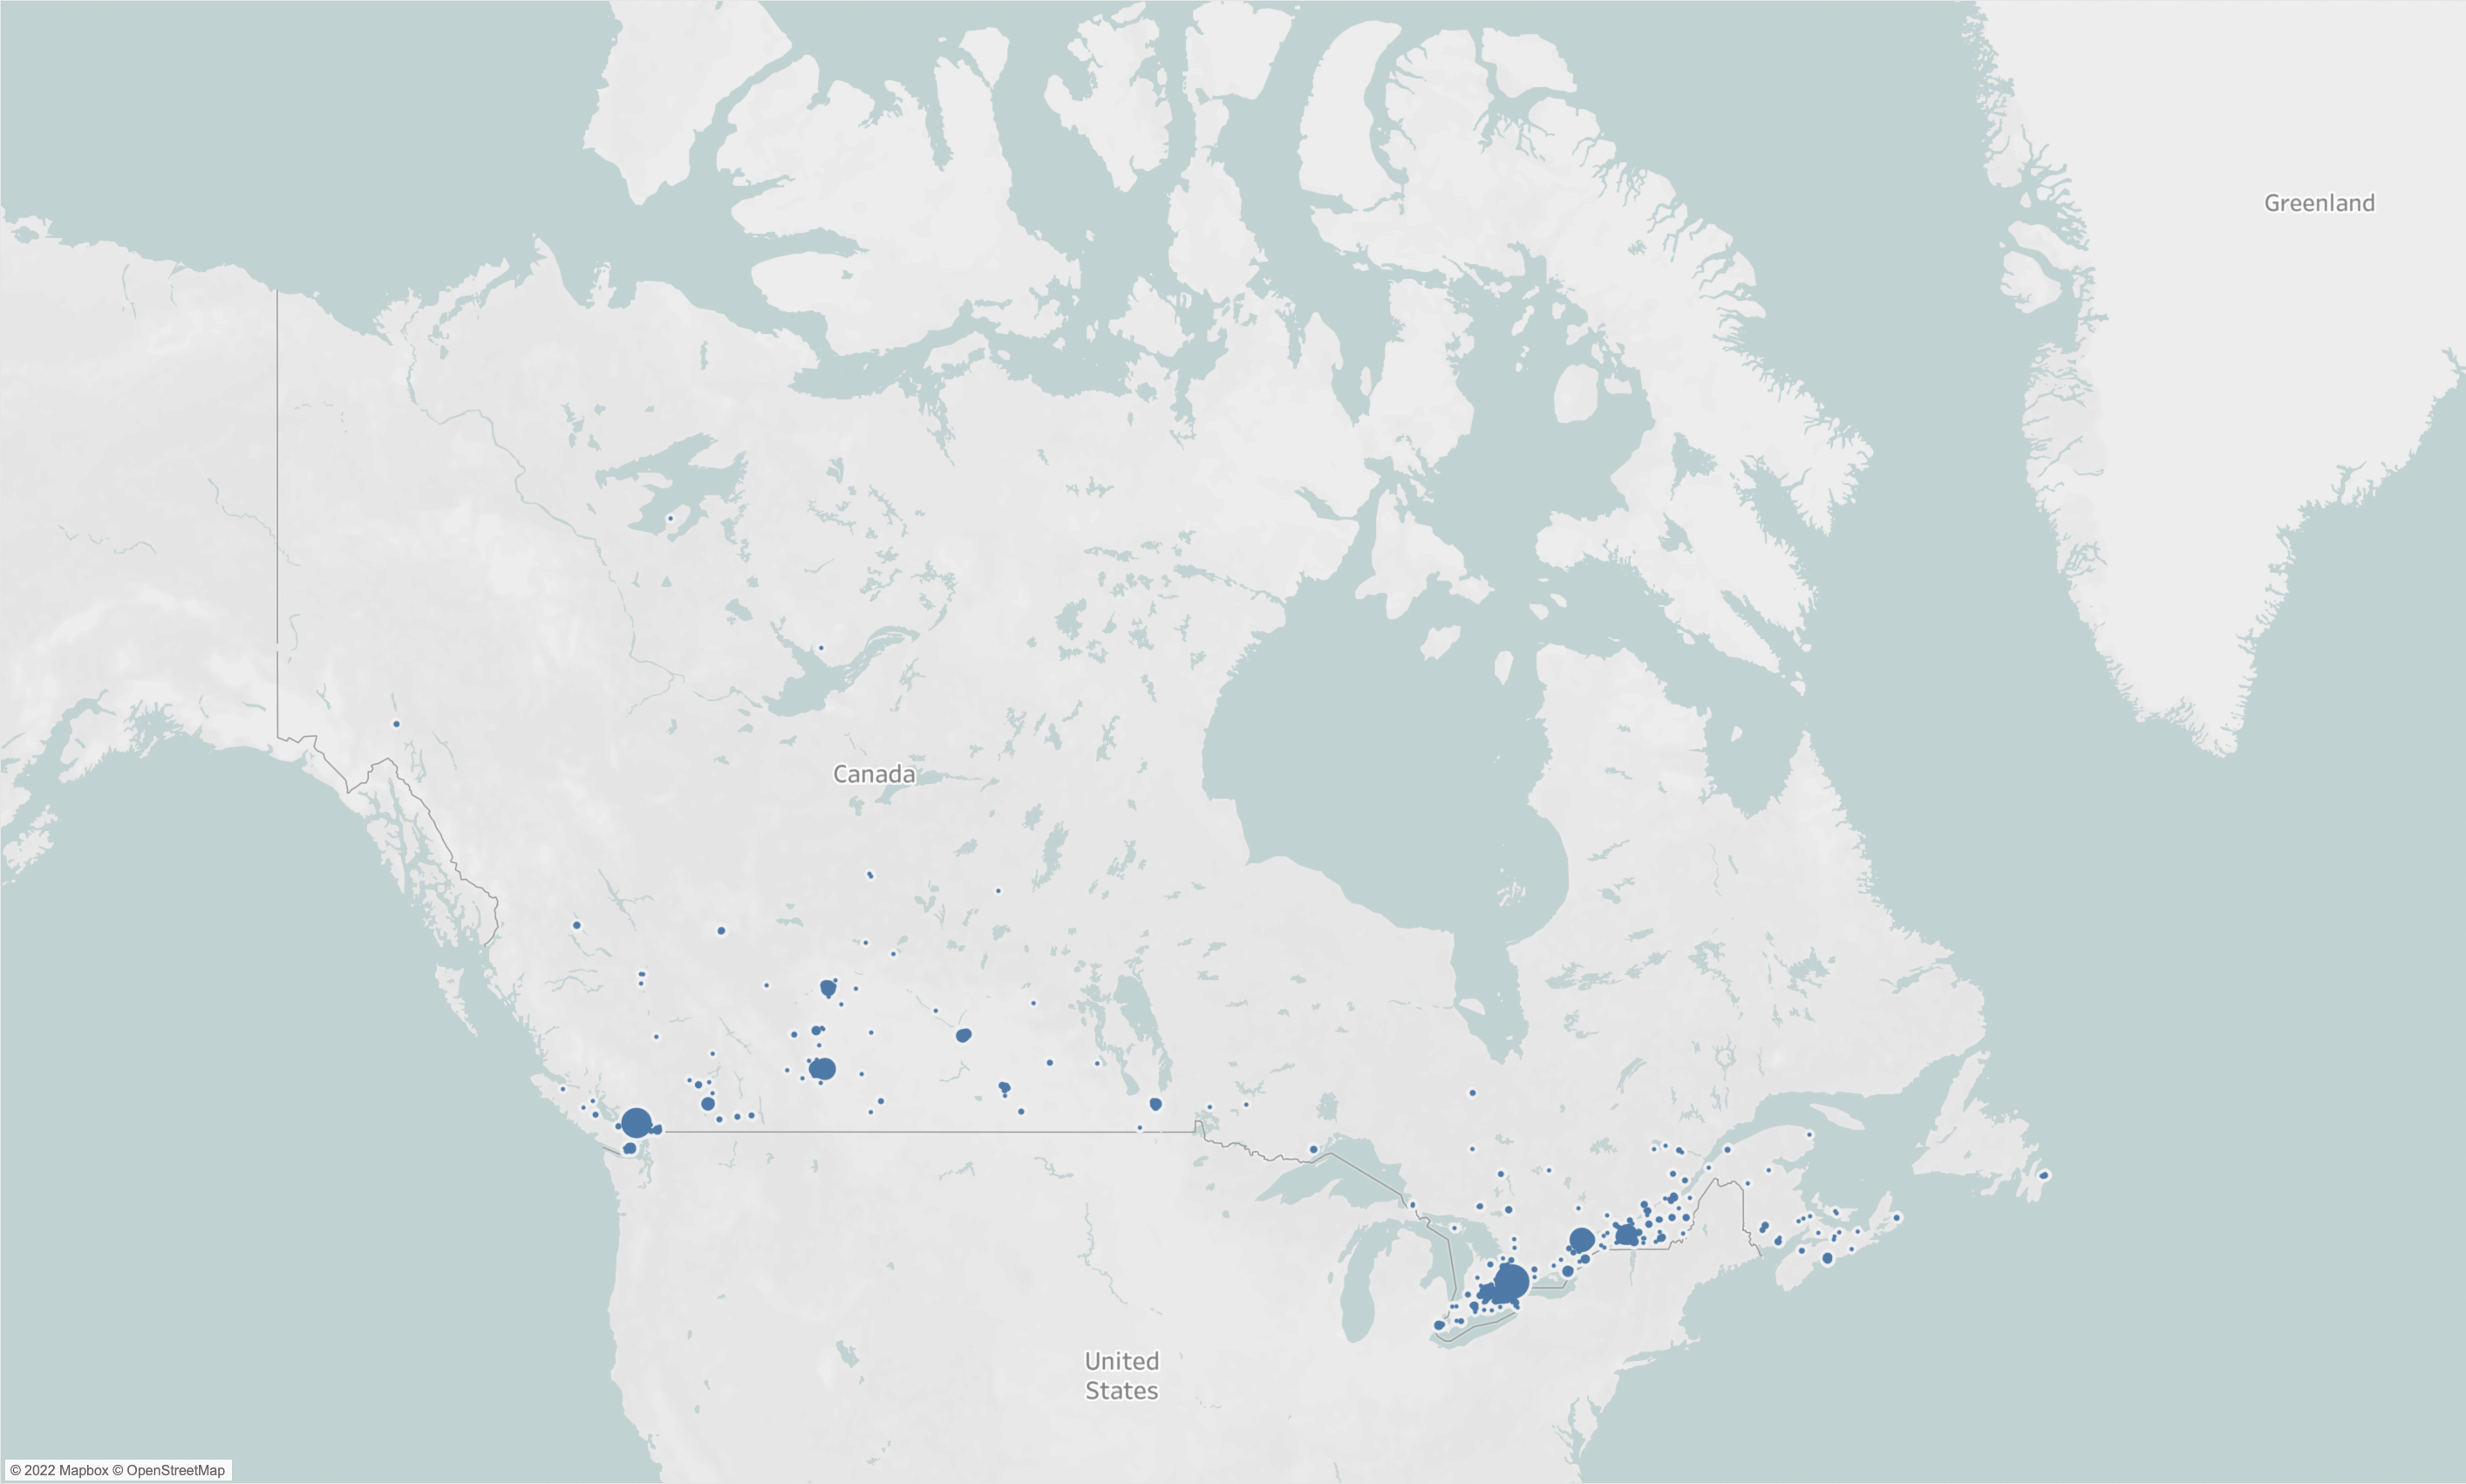 ICT partners Distribution in Canada